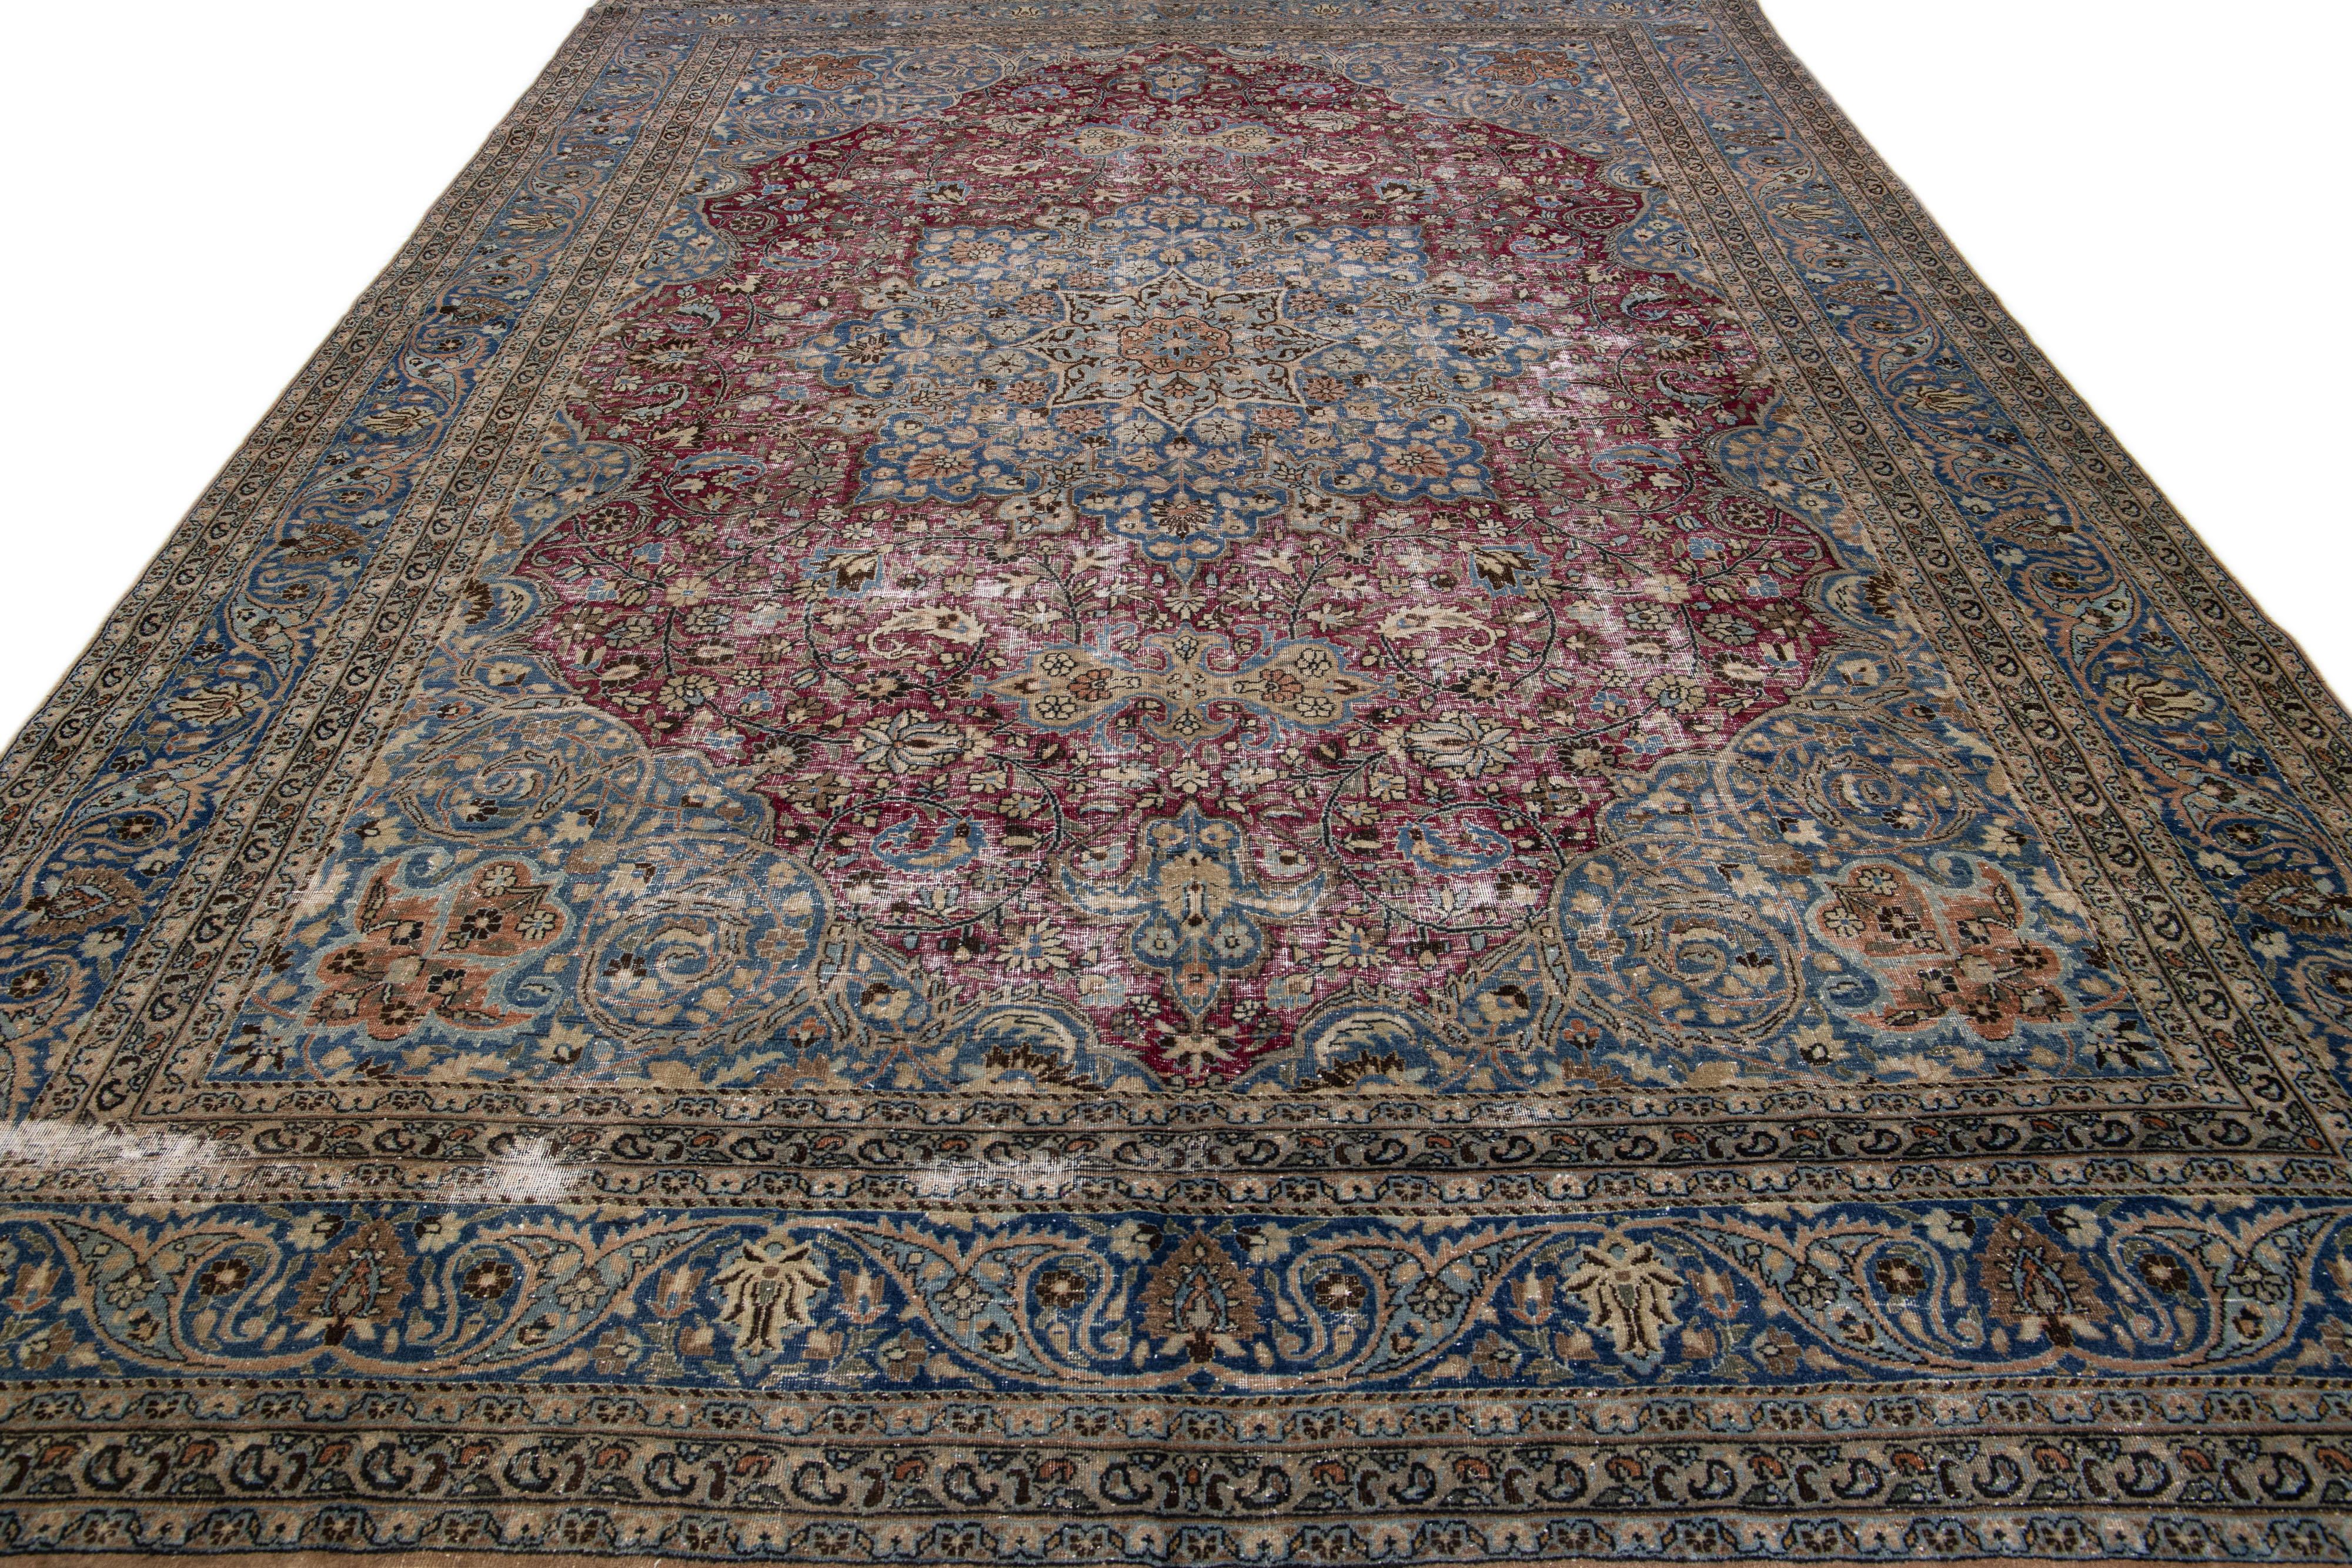 Islamic Antique Persian Mashad Red and Blue Handmade Wool Rug with Rosette Motif For Sale